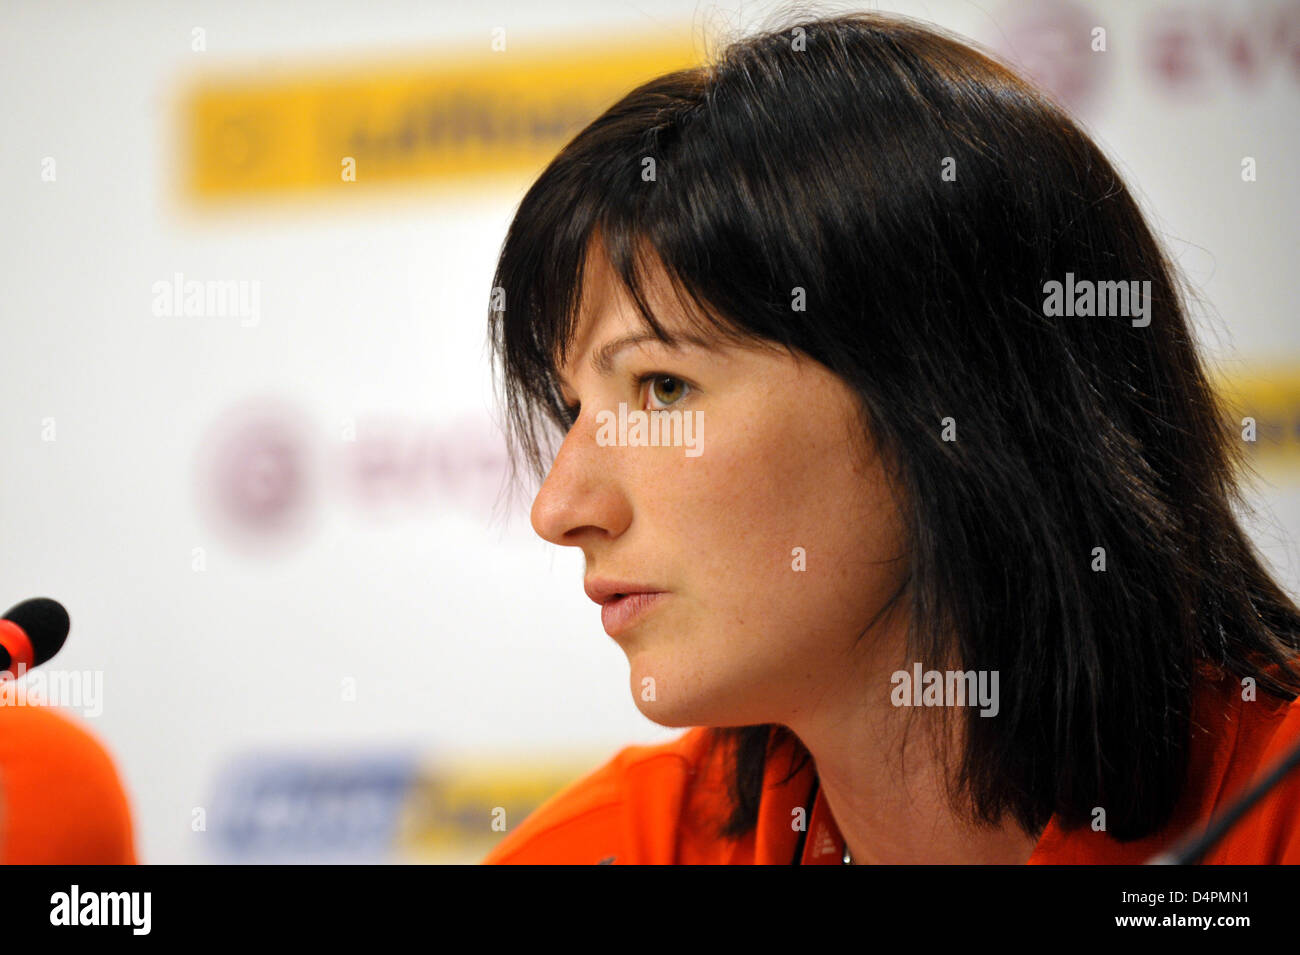 Germany?s javelin thrower Linda Stahl speaks at a press conference of the German Athletics Association DLV in Berlin, Germany, 19 August 2009. Steffi Nerius had won the first gold medal for Germany in the women?s javelin final at the 12th IAAF World Championships in Athletics on 18 August. Photo: Jens Buettner Stock Photo